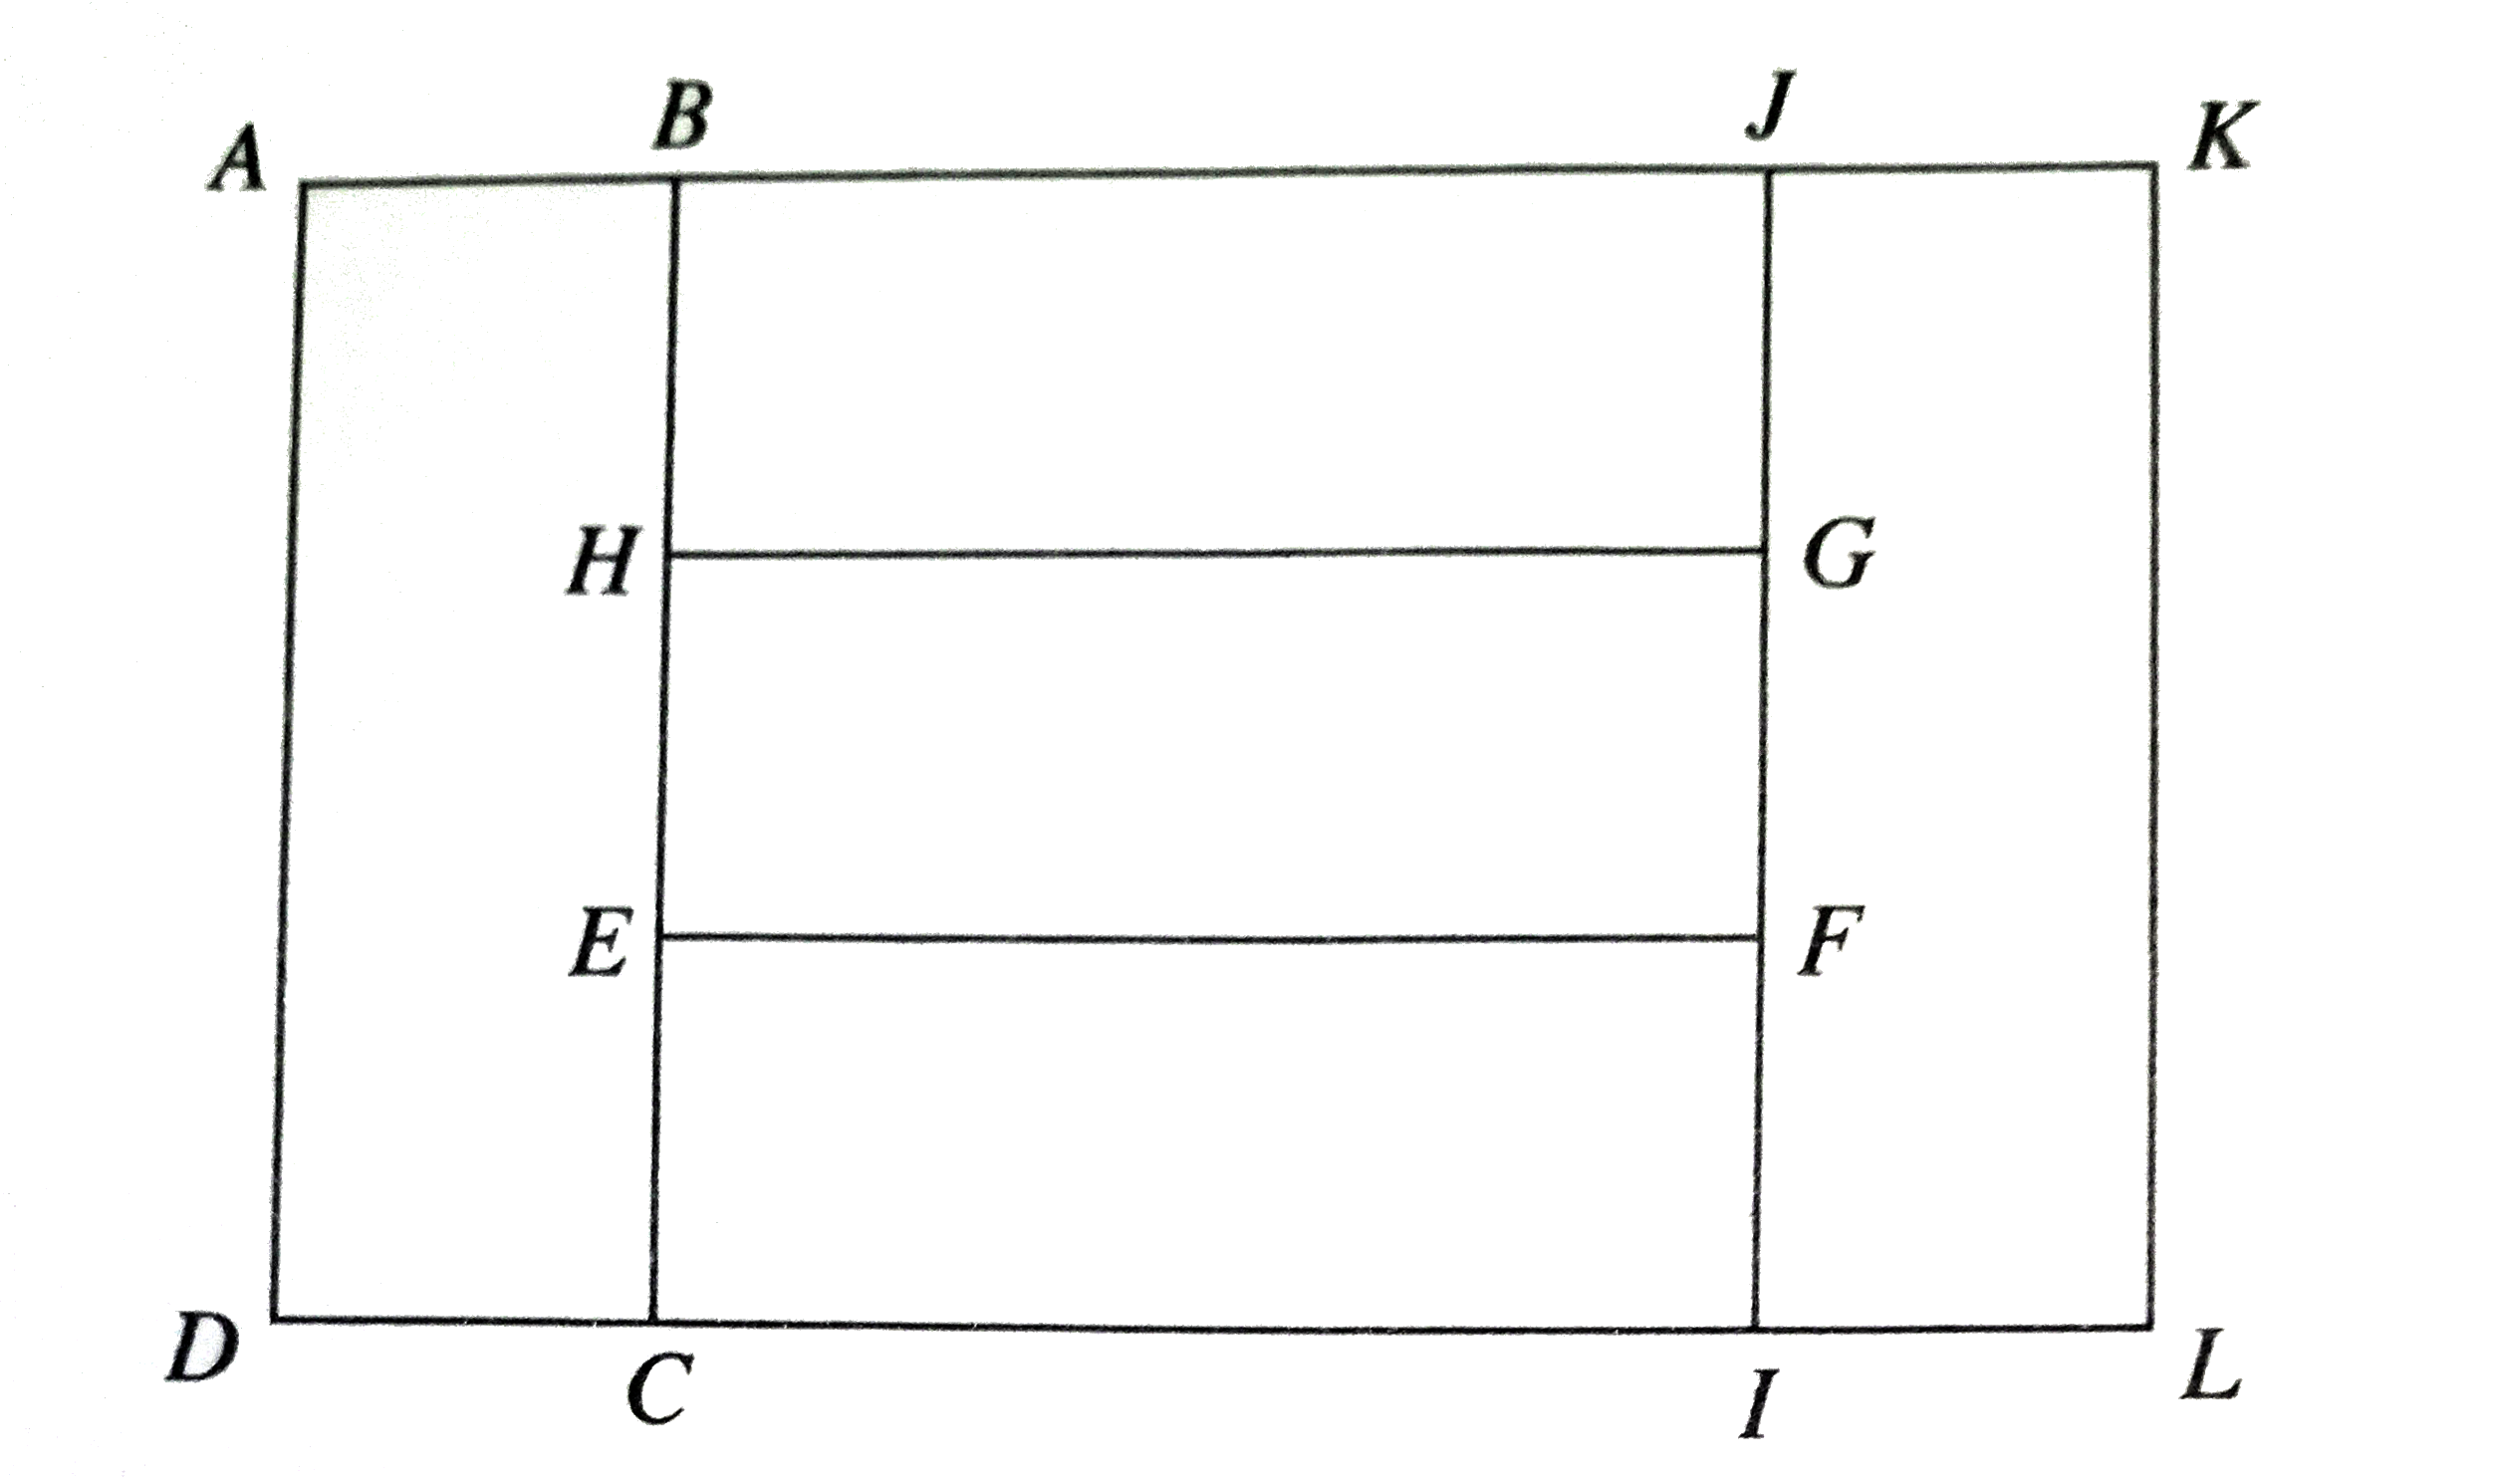 Rectangle AKLD consists of 5 congruent rectangles , as shown in the figure below. Which of the following is the ratio of the length of bar(AK) to the length of bar(AD) ?